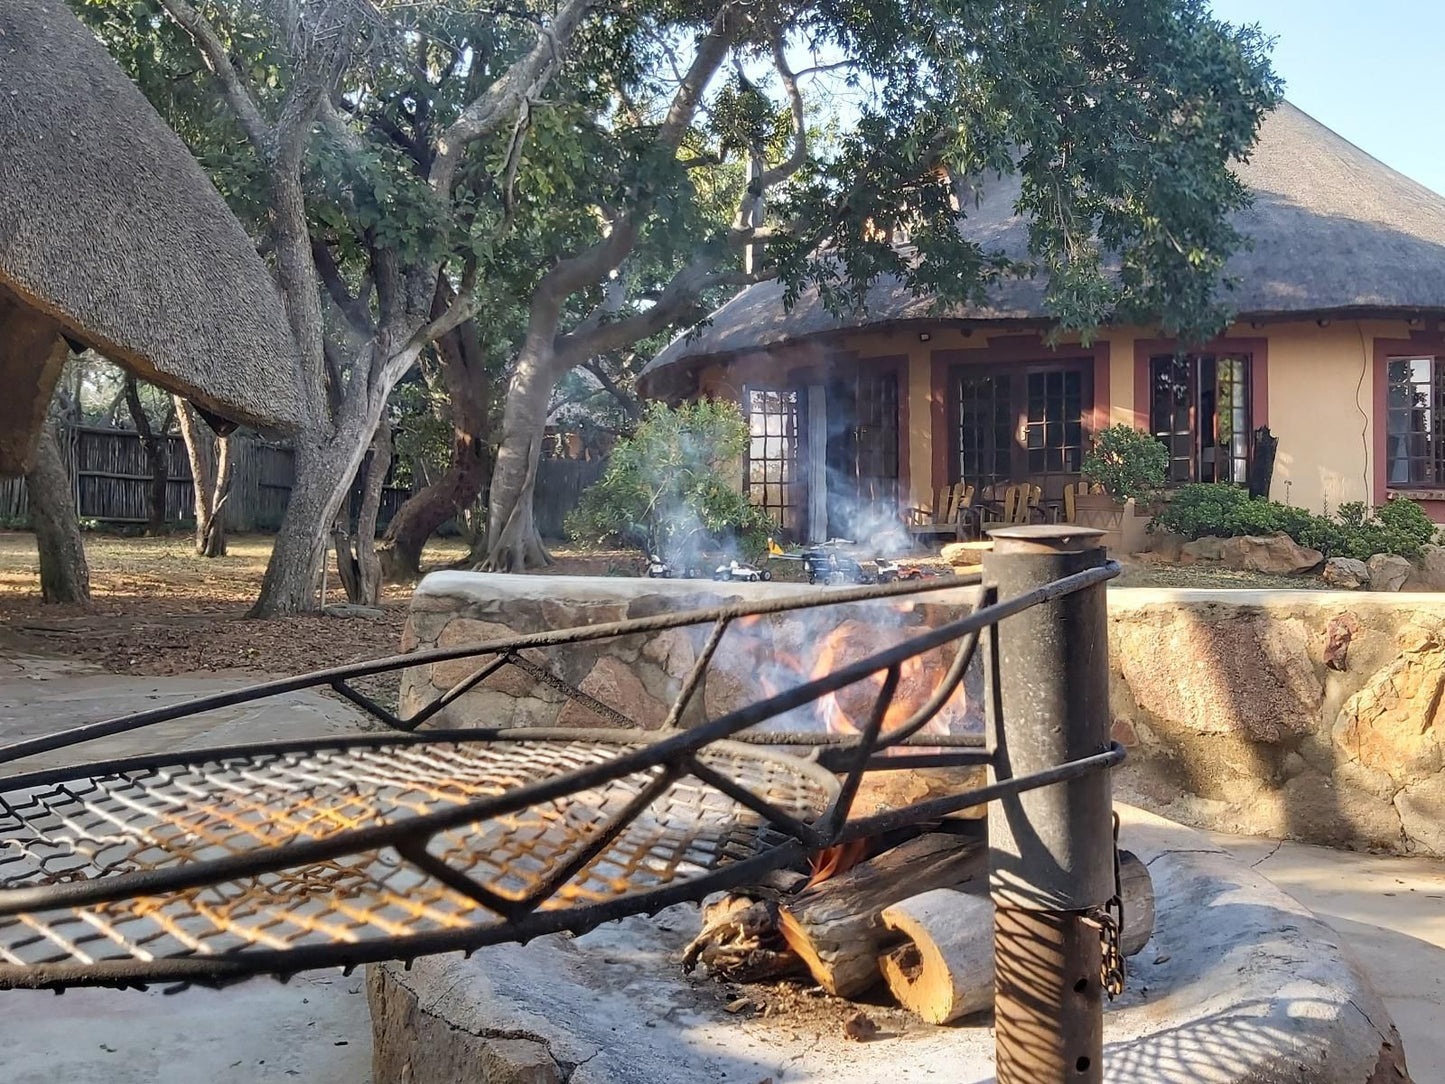 Izintaba Private Game Reserve Vaalwater Limpopo Province South Africa Fire, Nature